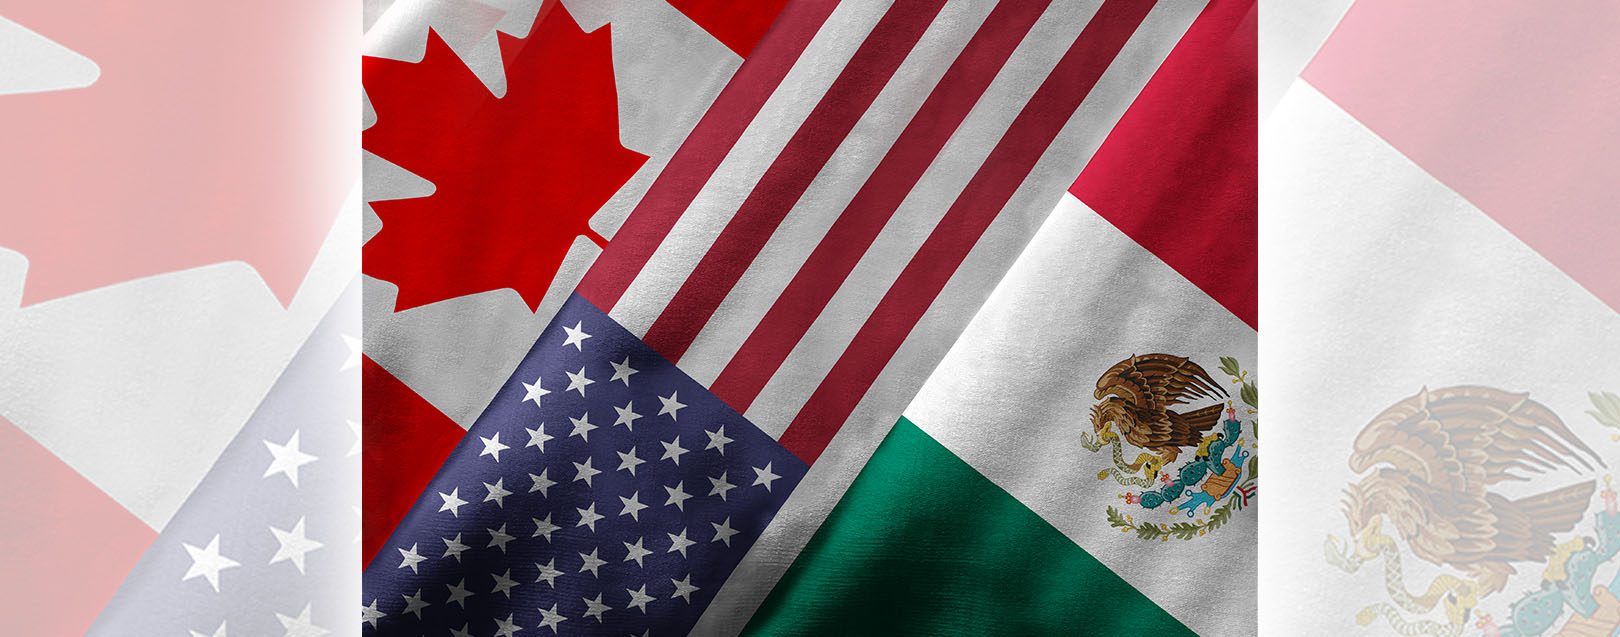 Trump lays 90-day timetable to open talks for NAFTA